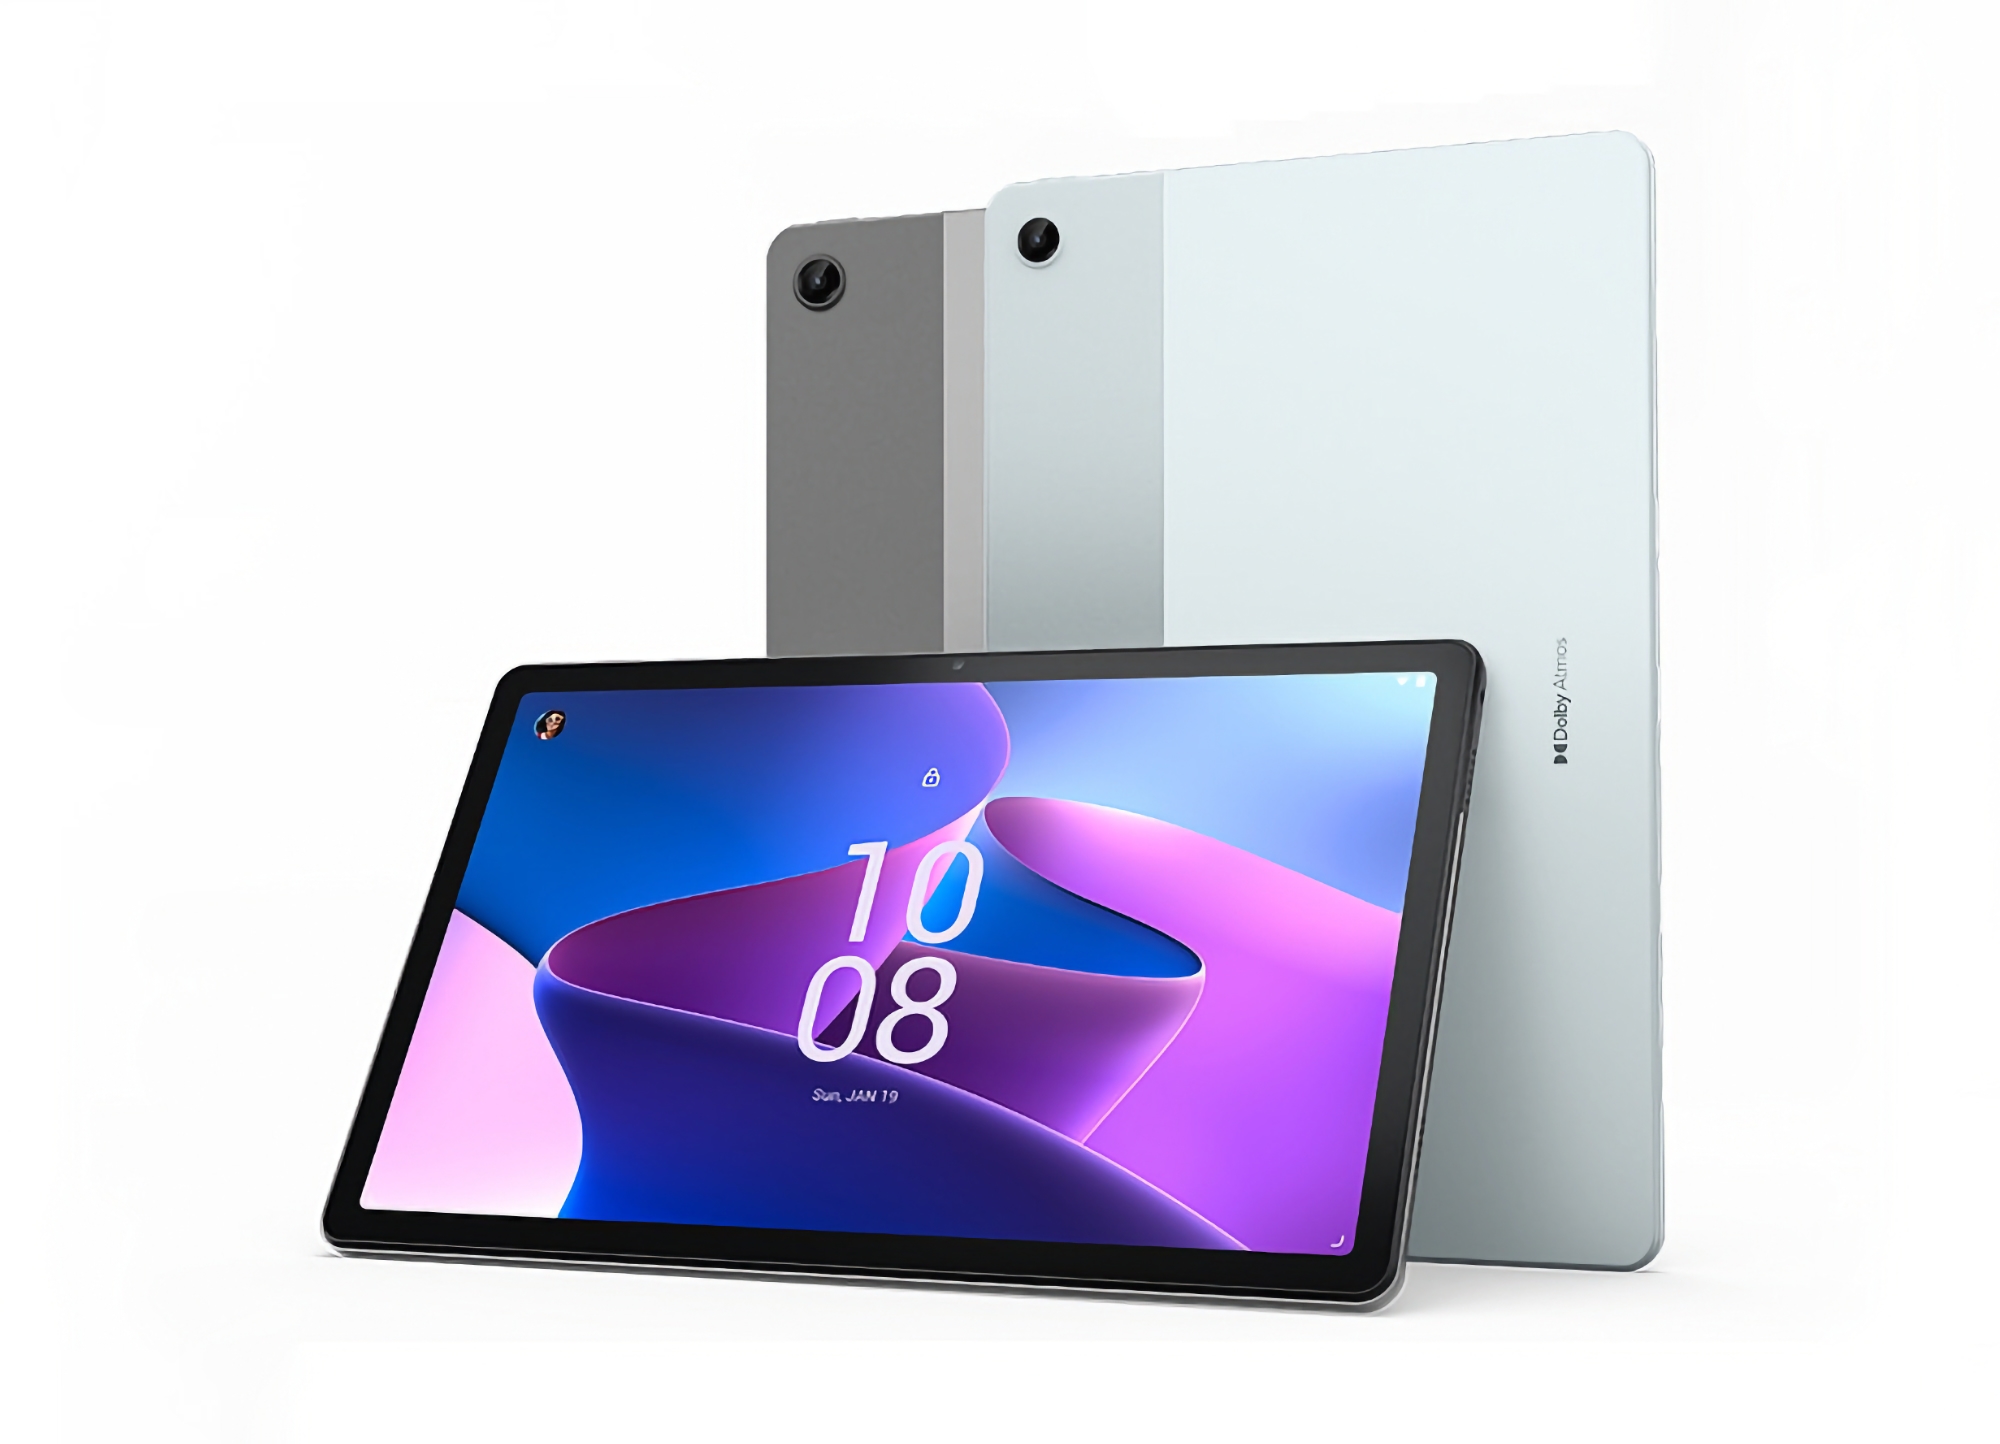 The Lenovo Tab M10 Plus (3rd Gen) with a 10.6-inch screen is available on Amazon for $50 off